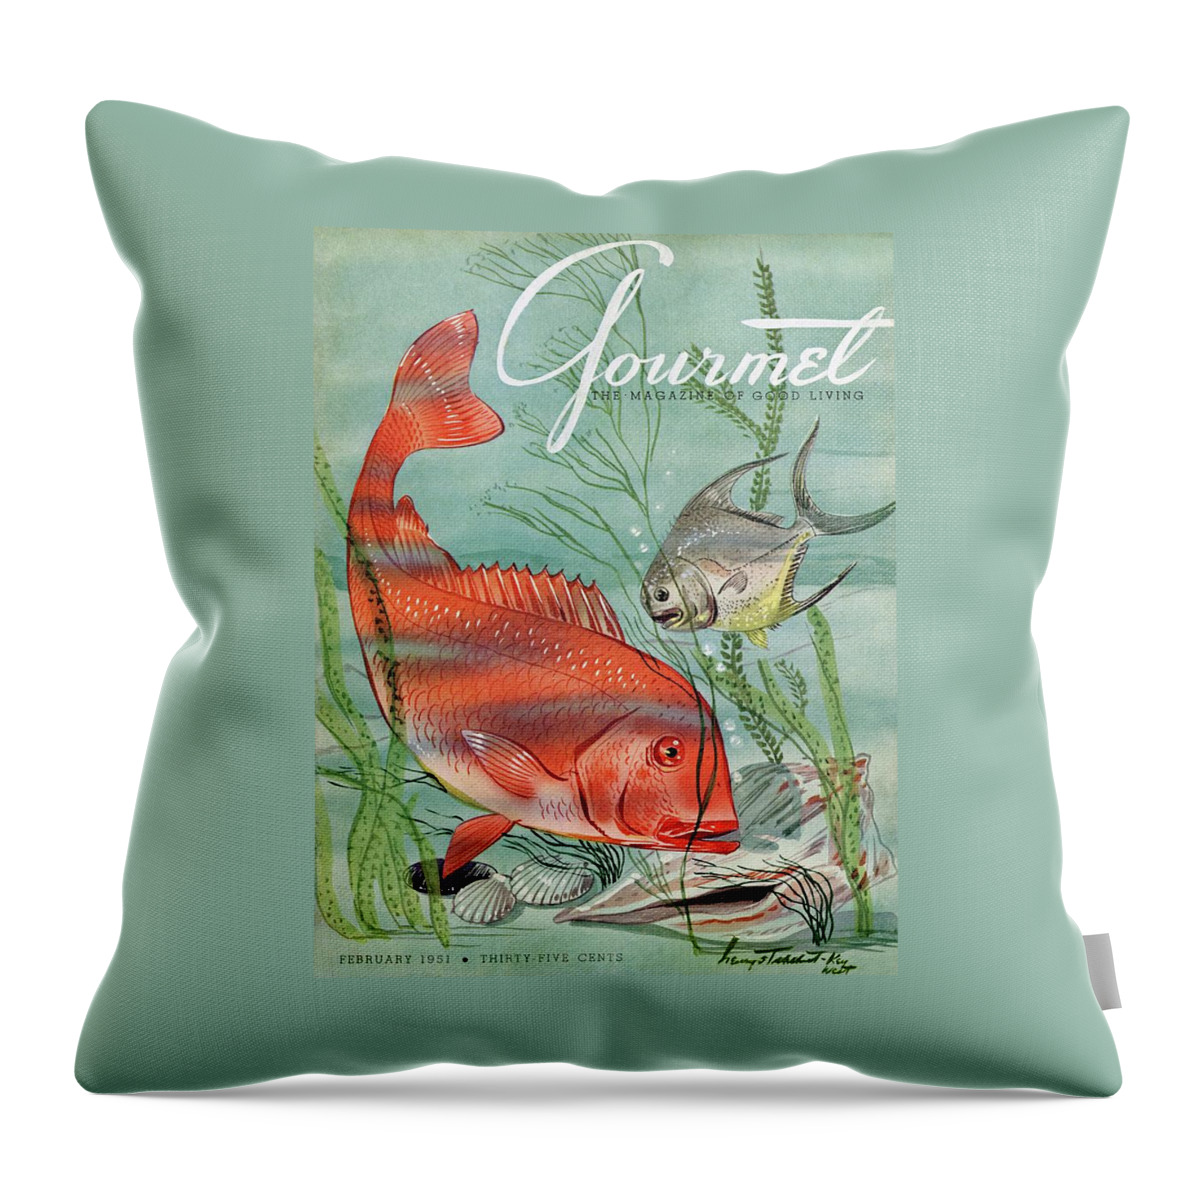 Gourmet Cover Featuring A Snapper And Pompano Throw Pillow